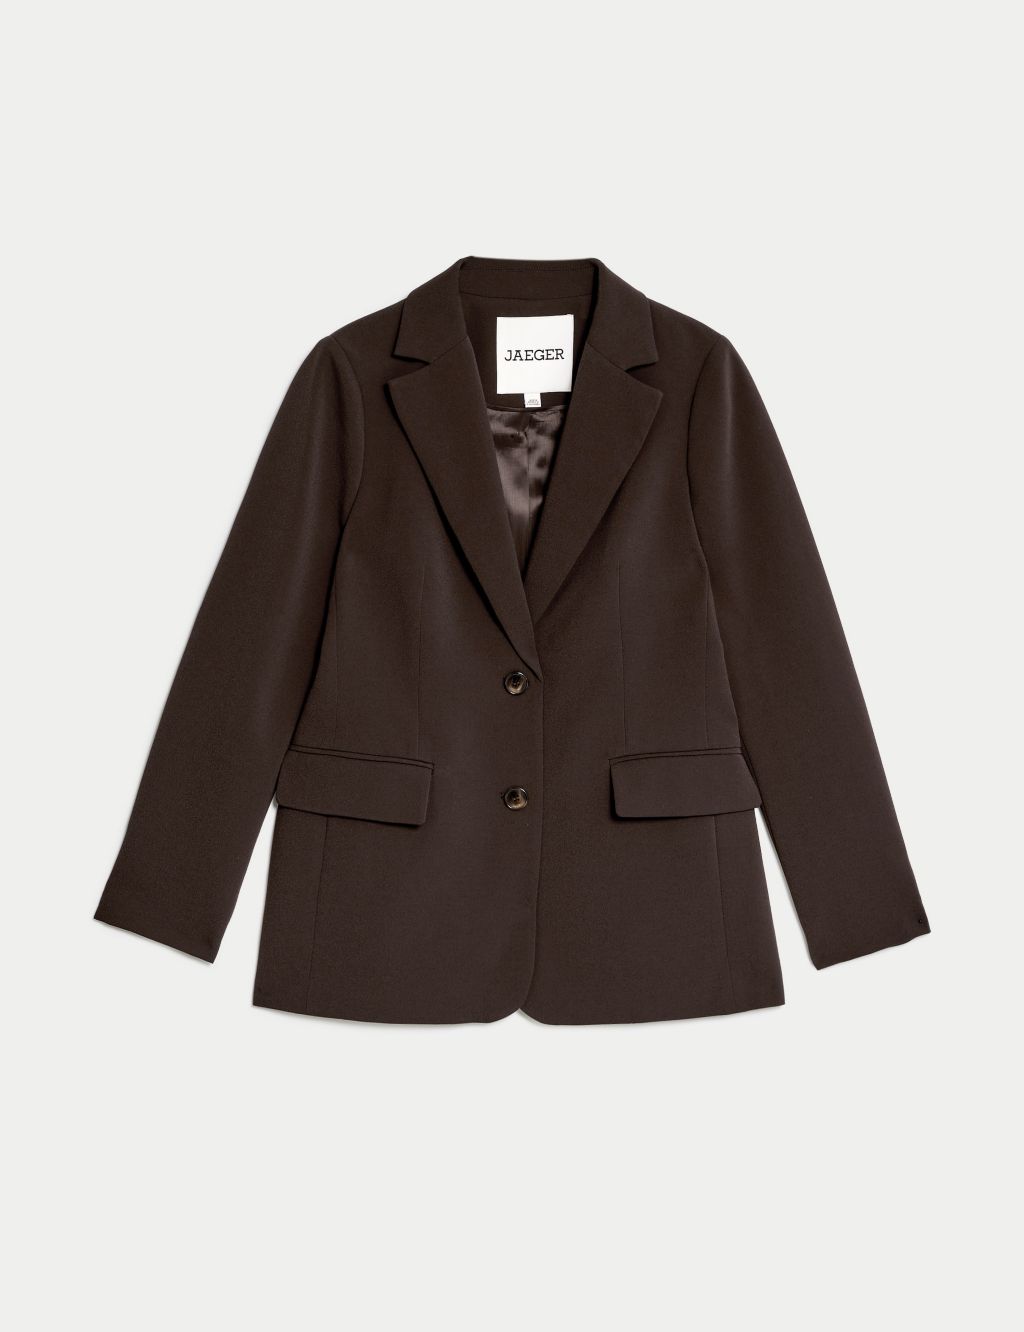 Crepe Tailored Single Breasted Blazer image 2